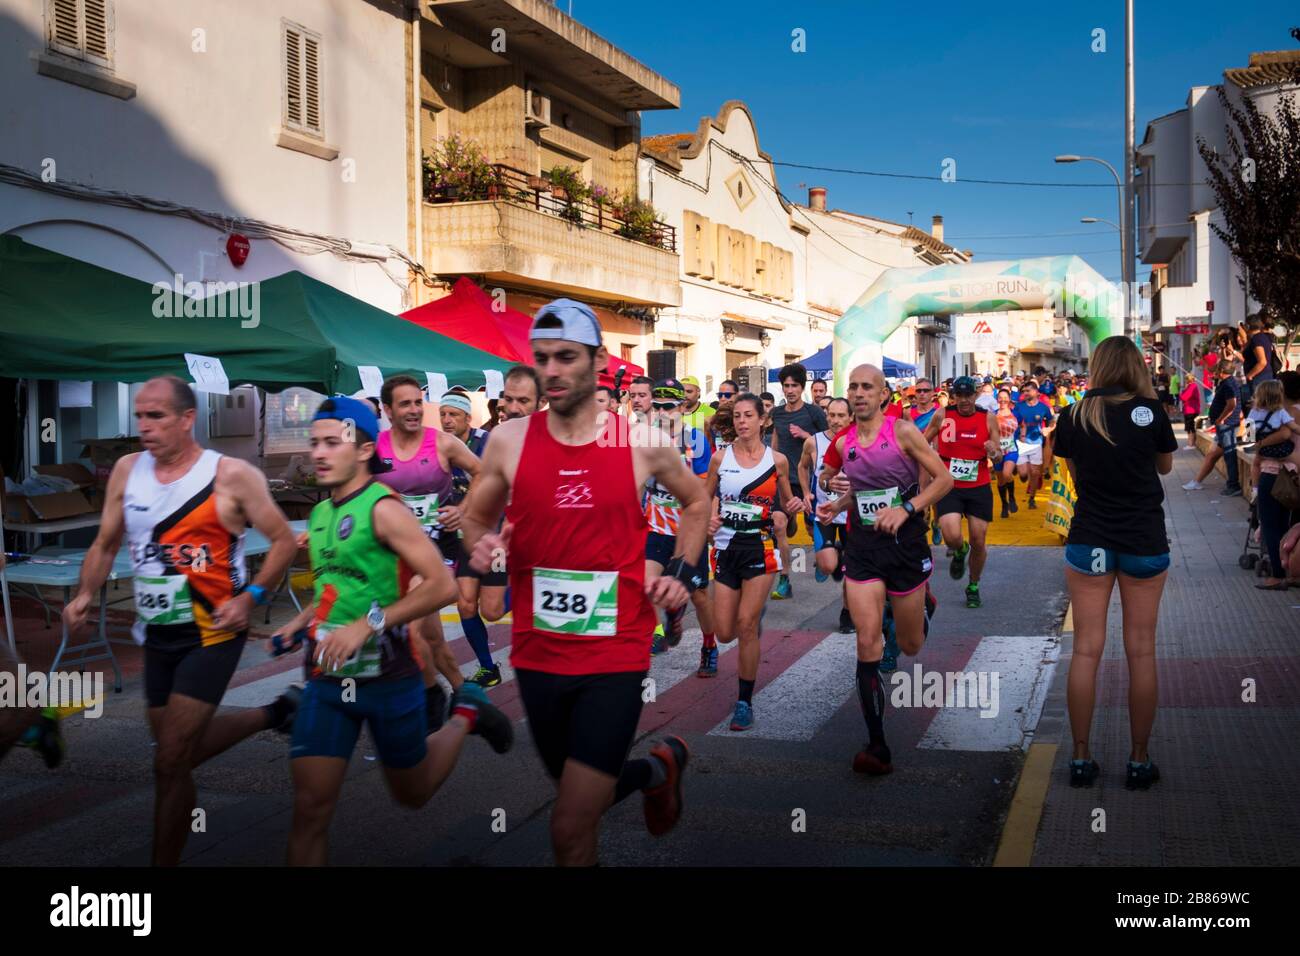 Start of cross country race in the La Safor Mountains of Spain Stock Photo